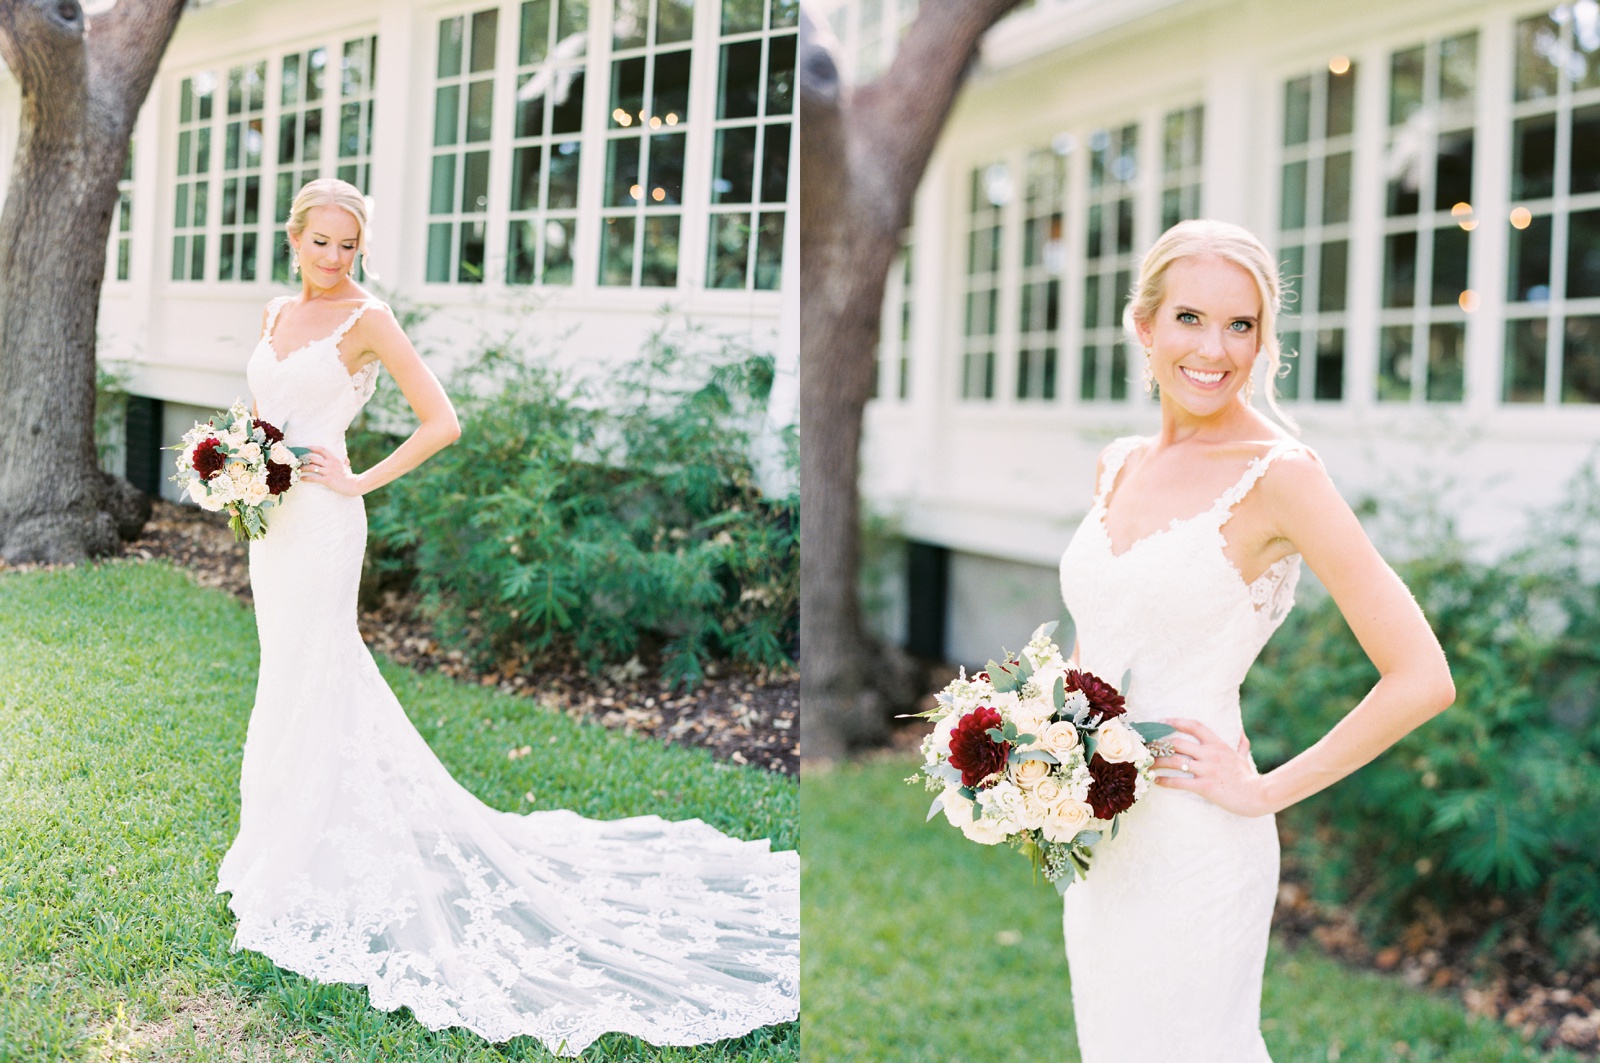 Bride in lace wedding dress with white, burgundy, and greenery bouquet